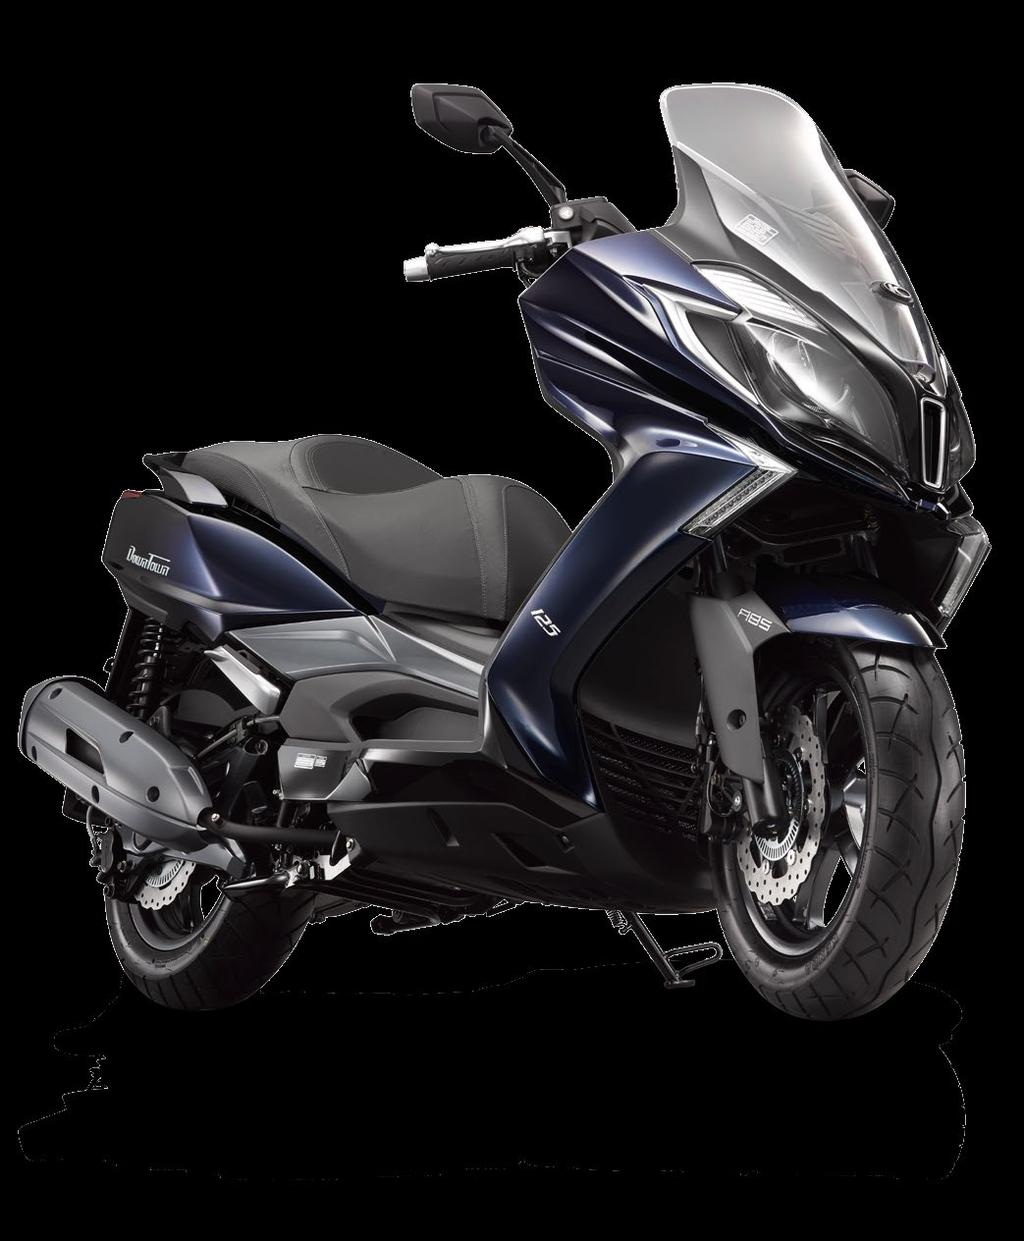 This year, KYMCO will reveal the Downtown 350i at the EICMA show in a new Deep Blue color and EURO 4 approved emission specifications.